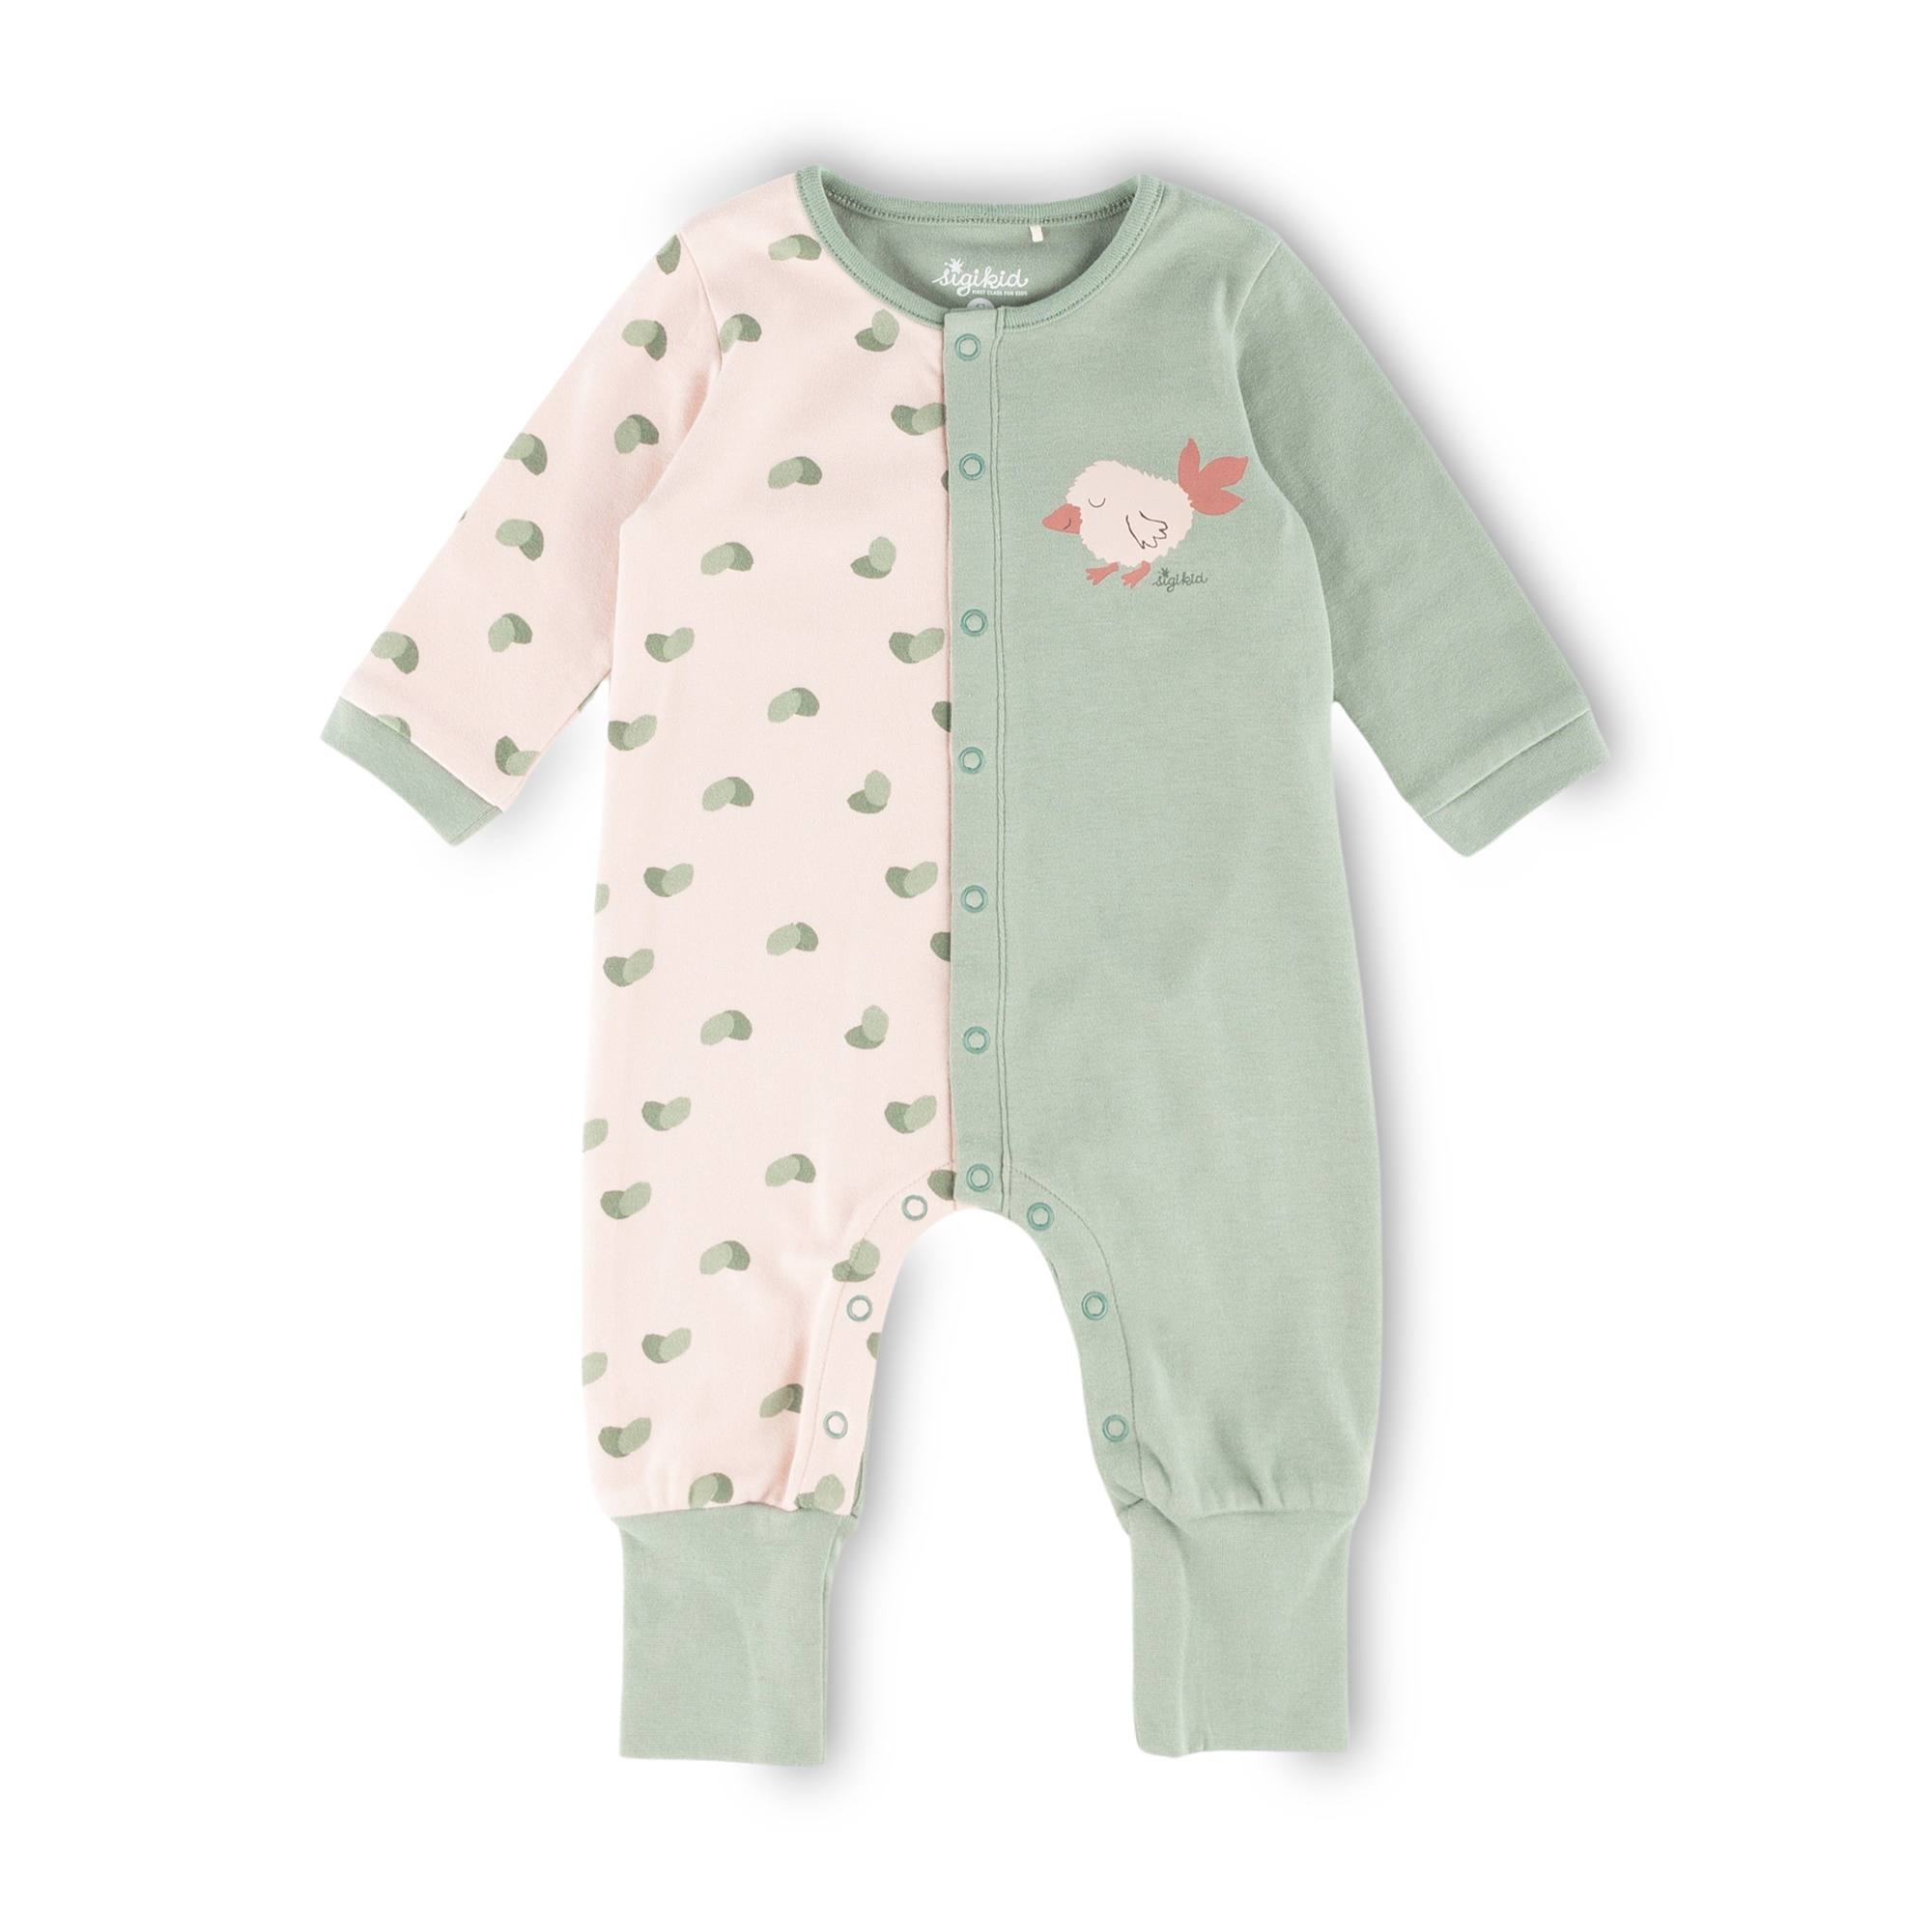 Baby sleepsuit overall chick